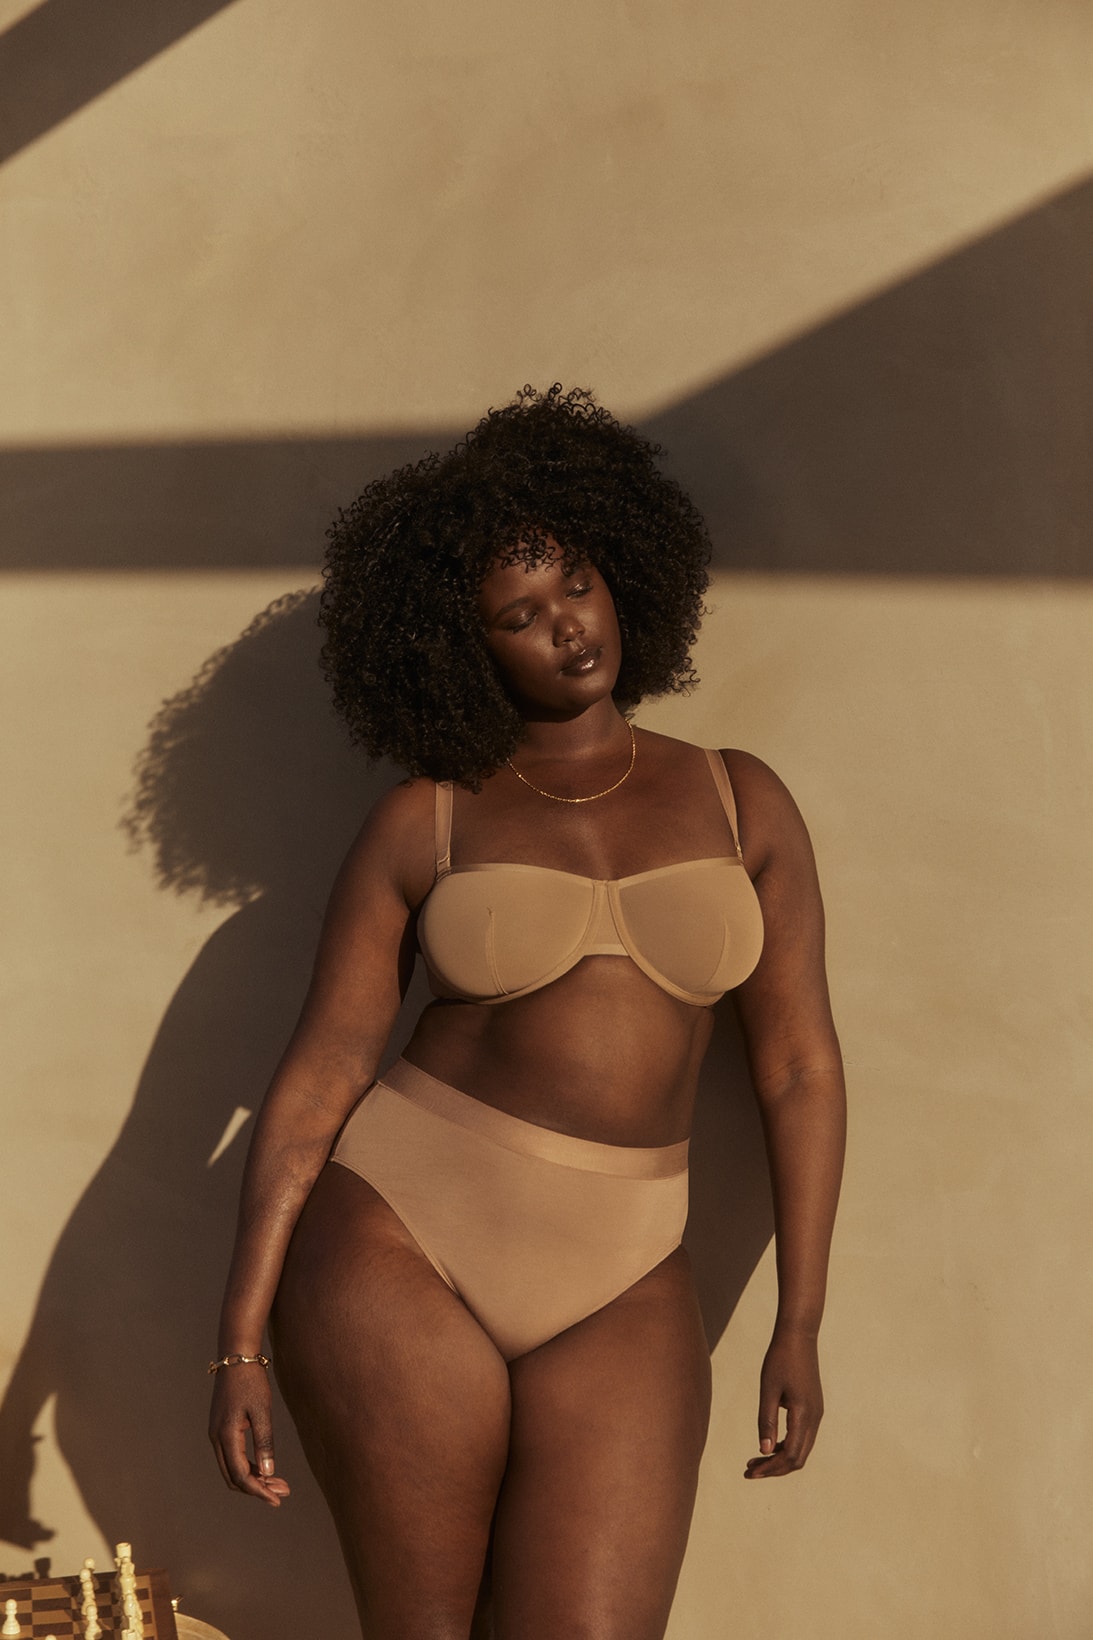 CUUP Debuts New Summer Colorways For Underwear